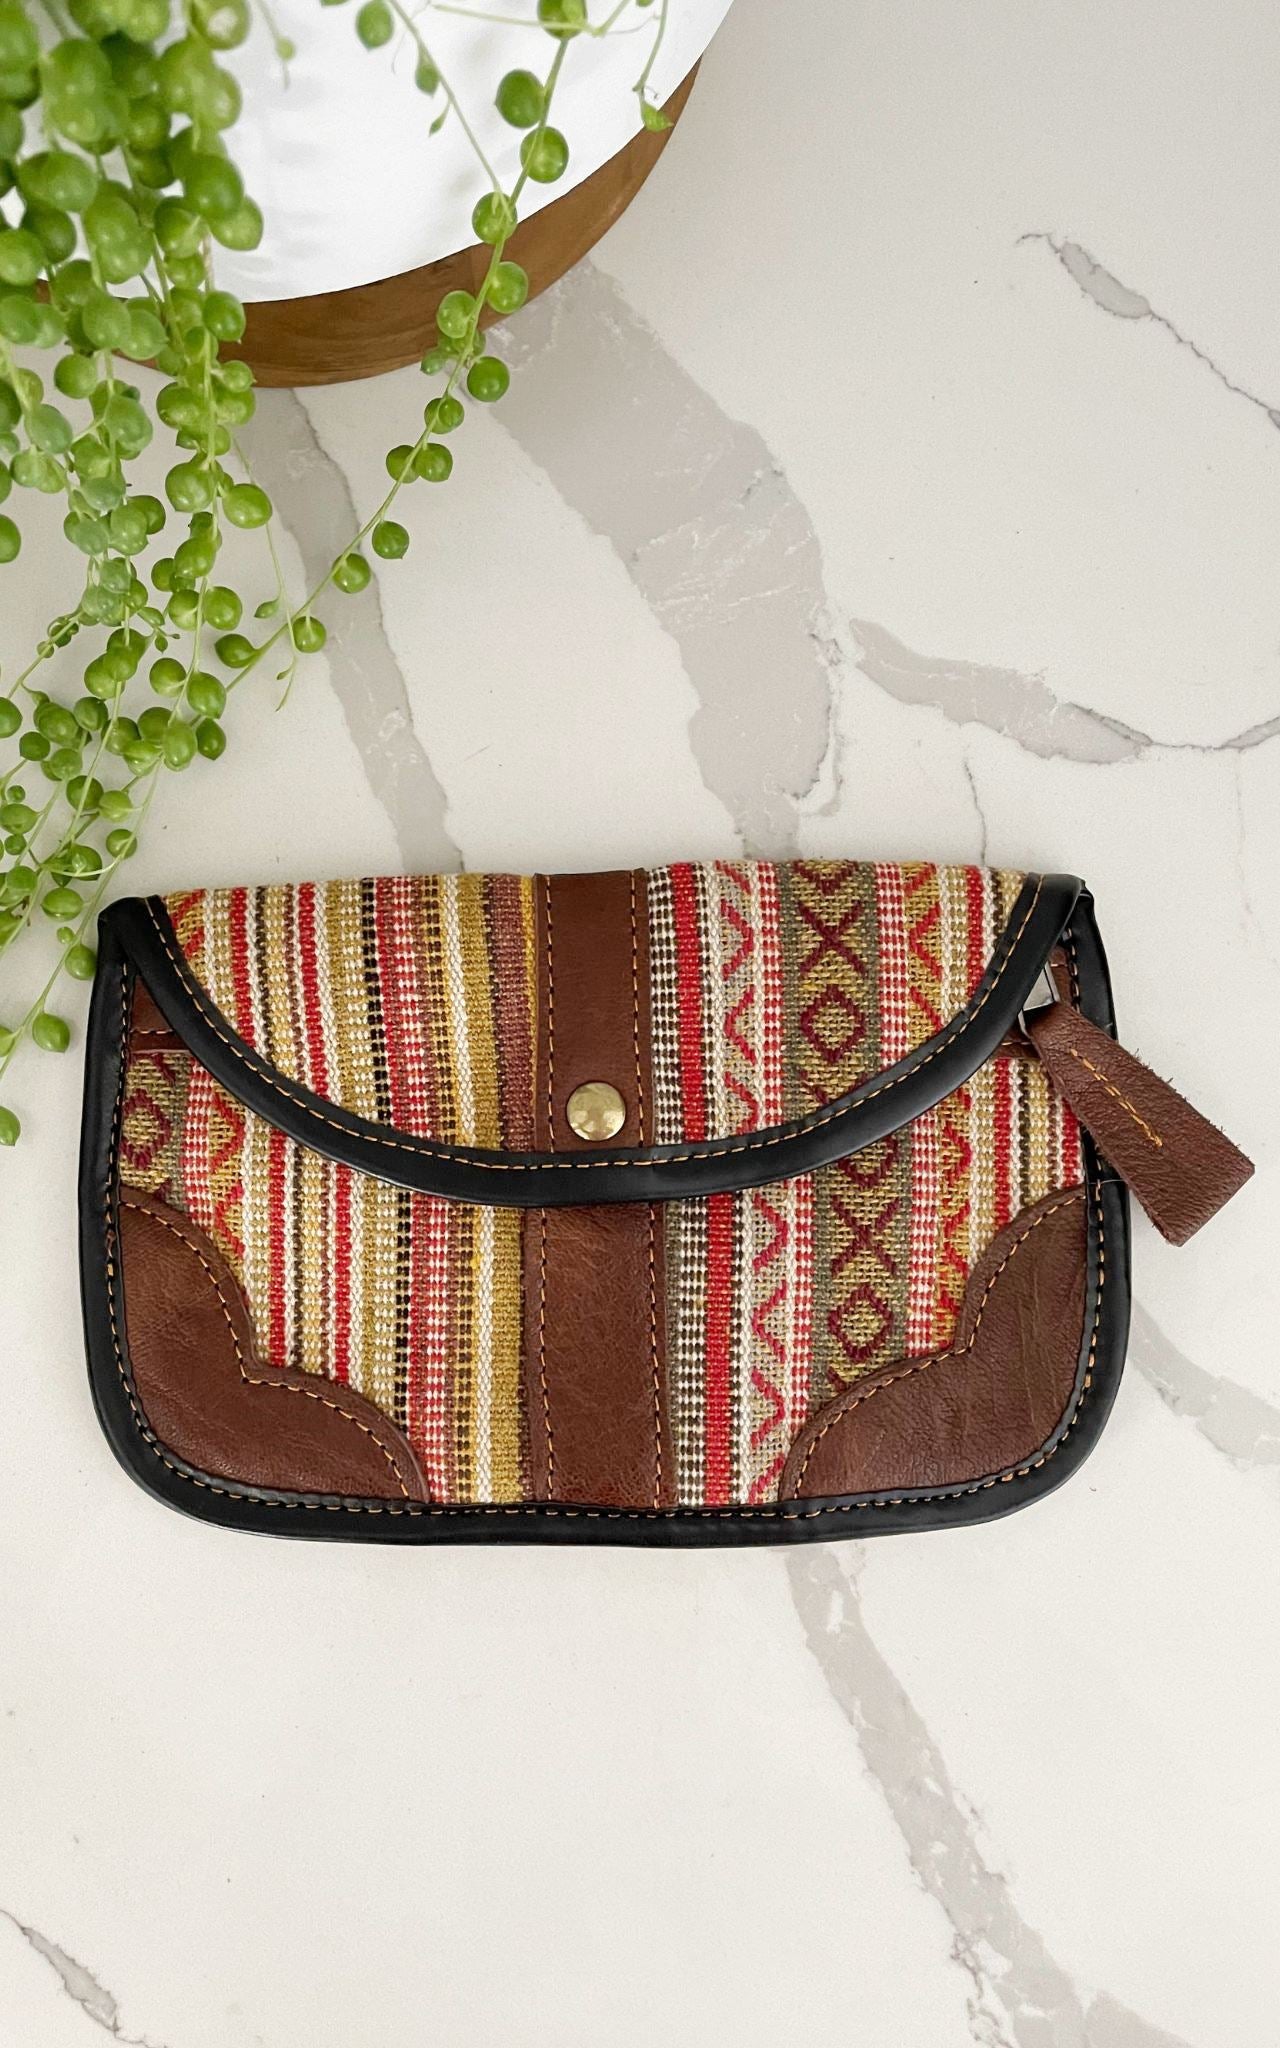 Surya Australia Ethical Buffalo Leather + Woven Cotton Clutch Wallets from Nepal - Ranil